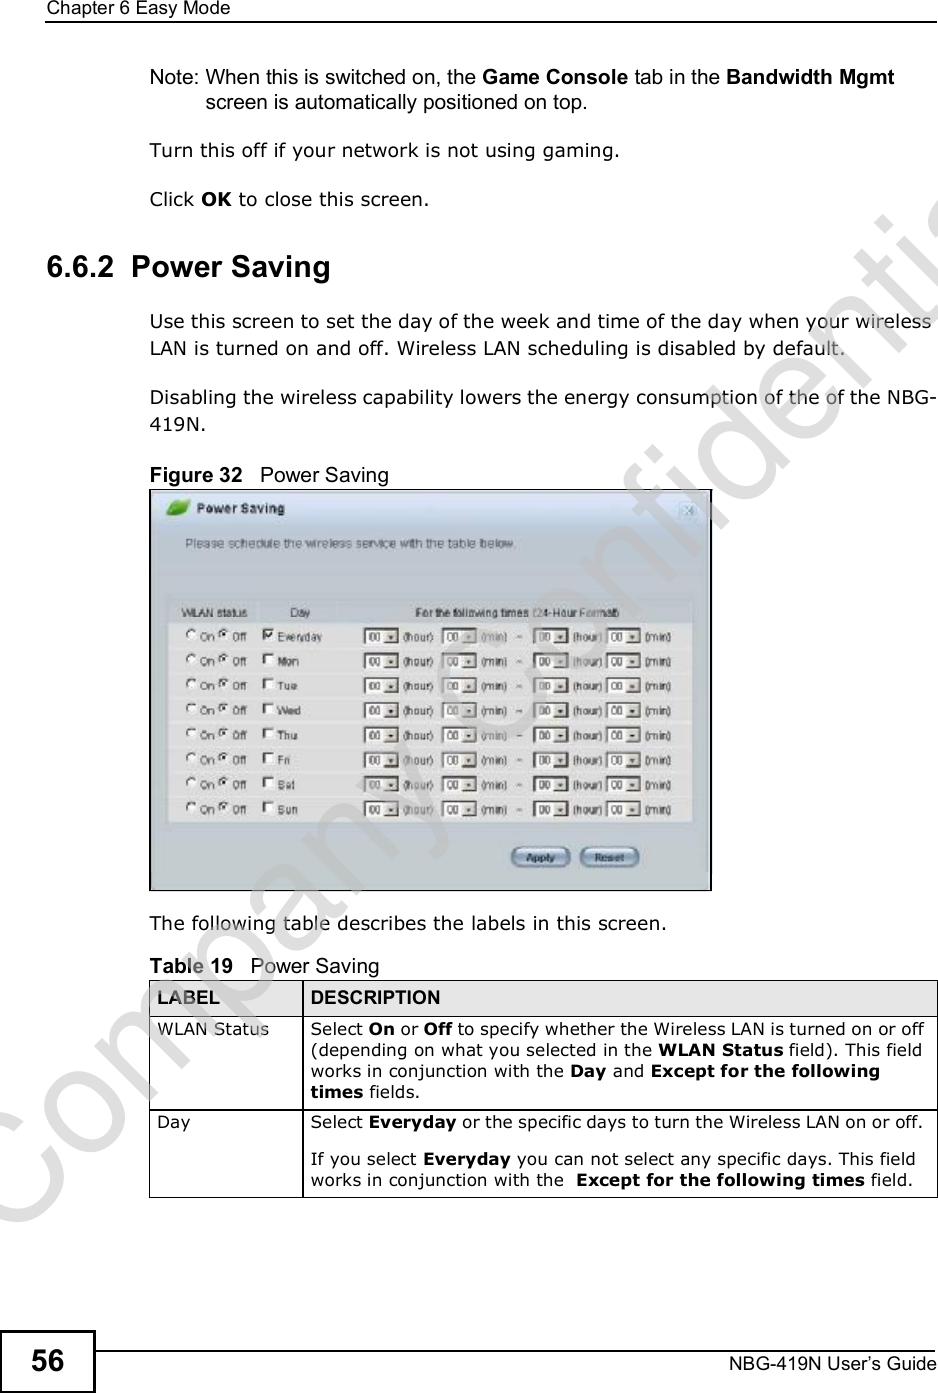 Chapter 6Easy ModeNBG-419N User s Guide56Note: When this is switched on, the Game Console tab in the Bandwidth Mgmt screen is automatically positioned on top. Turn this off if your network is not using gaming.Click OK to close this screen.6.6.2  Power SavingUse this screen to set the day of the week and time of the day when your wireless LAN is turned on and off. Wireless LAN scheduling is disabled by default. Disabling the wireless capability lowers the energy consumption of the of the NBG-419N. Figure 32   Power Saving The following table describes the labels in this screen.Table 19   Power Saving LABEL DESCRIPTIONWLAN Status Select On or Off to specify whether the Wireless LAN is turned on or off (depending on what you selected in the WLAN Status field). This field works in conjunction with the Day and Except for the following times fields.Day Select Everyday or the specific days to turn the Wireless LAN on or off. If you select Everyday you can not select any specific days. This field works in conjunction with the  Except for the following times field.Company Confidential